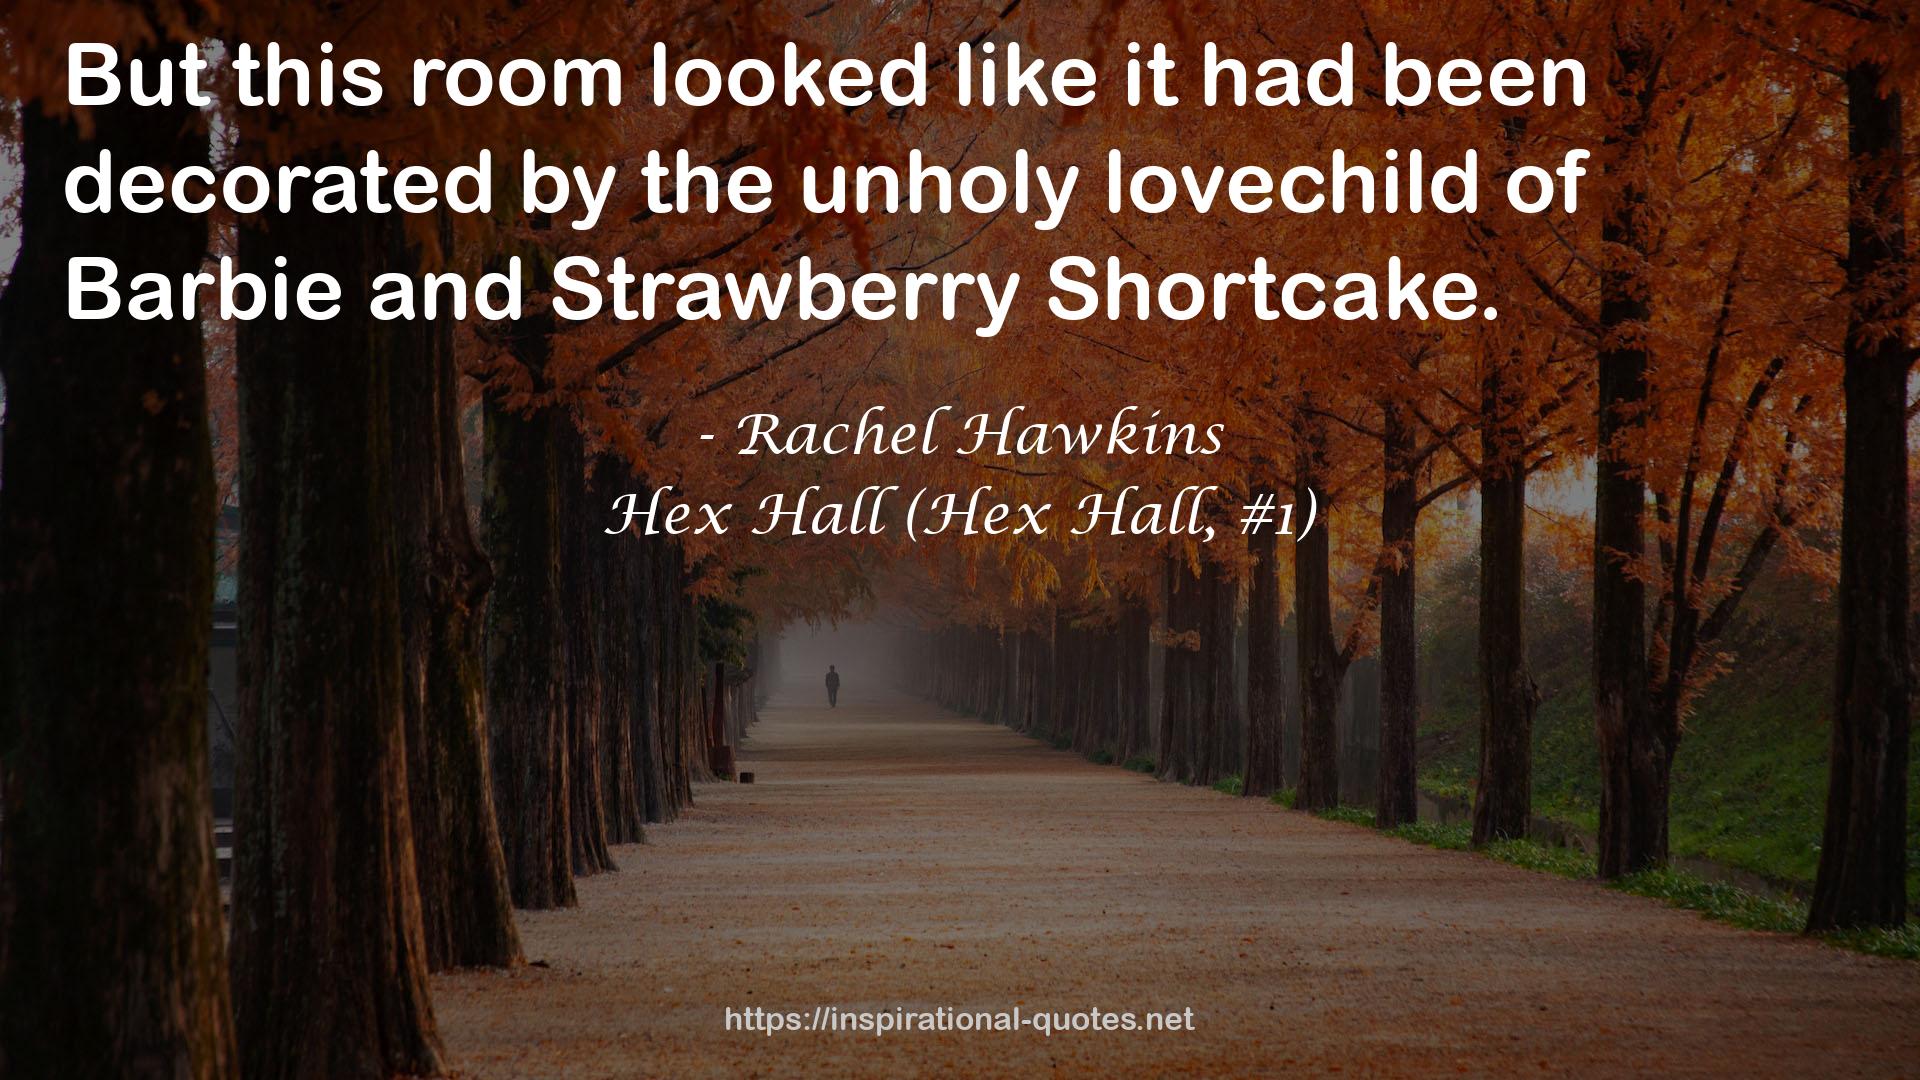 Hex Hall (Hex Hall, #1) QUOTES